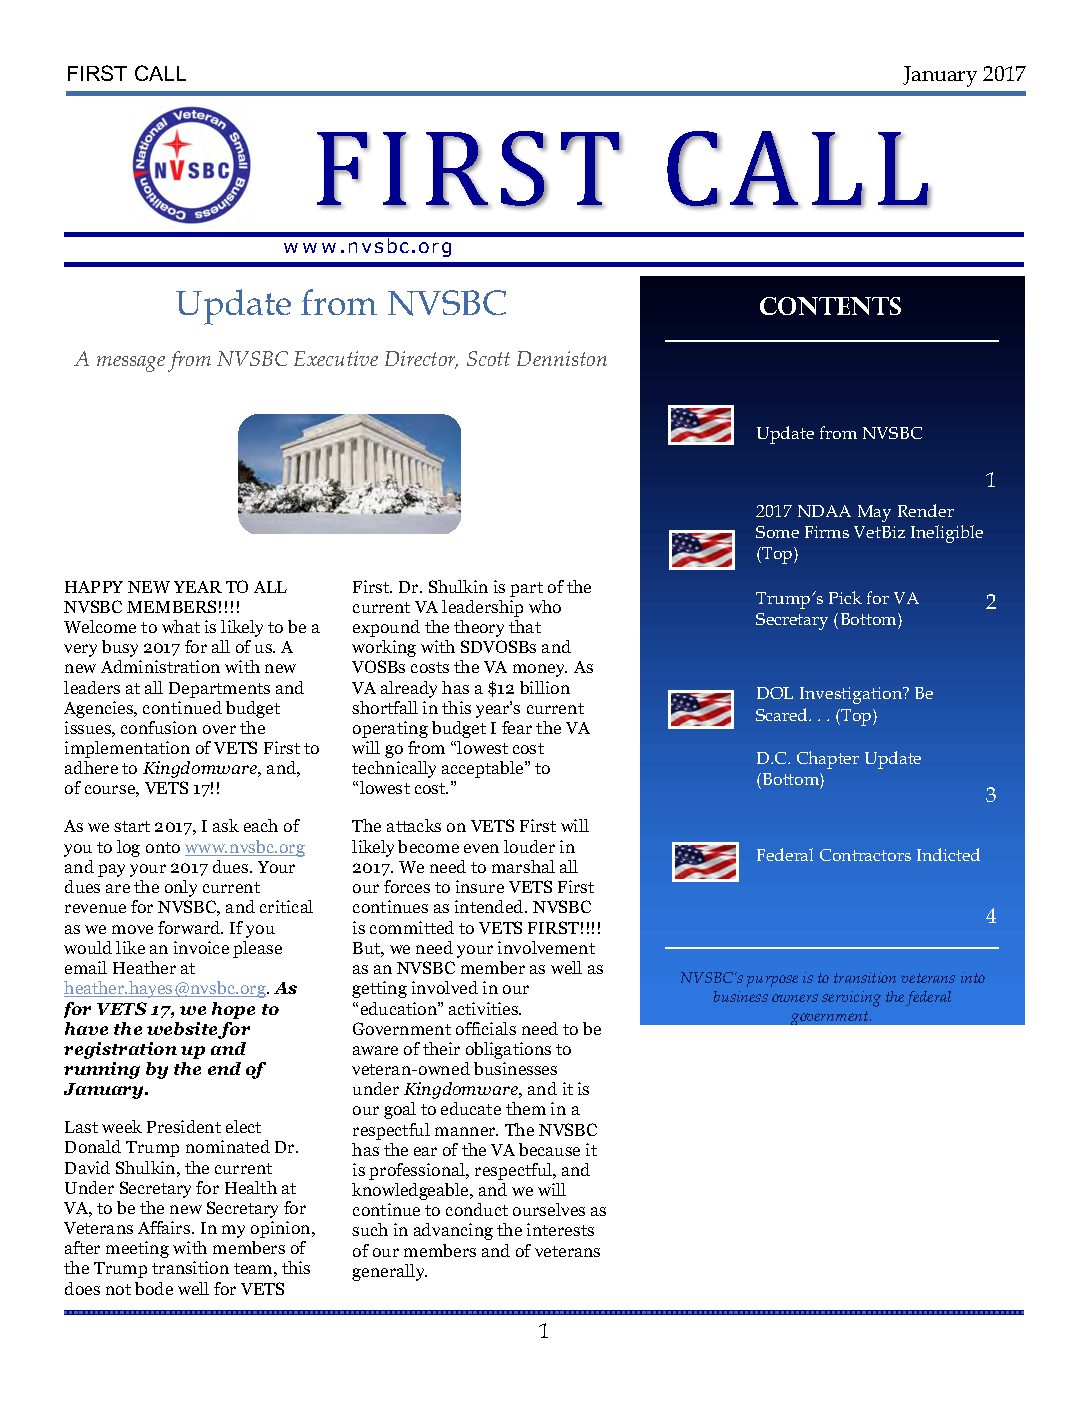 First Call January 2017